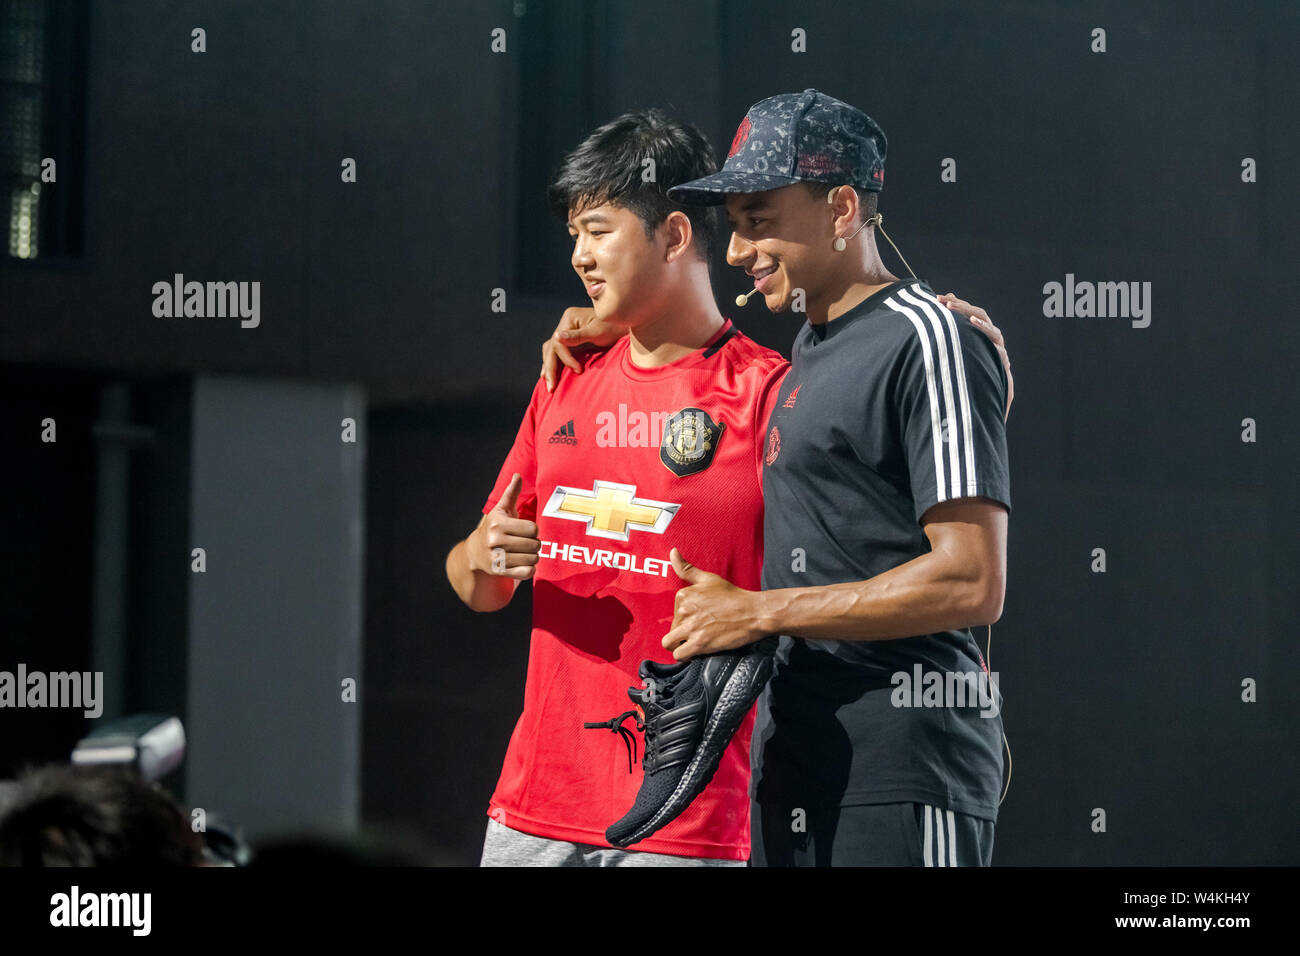 Jesse Lingard of Manchester United F.C. of Premier League attends a  promotional event for adidas during 2019 pre-season tour in Shanghai,  China, 23 July 2019 Stock Photo - Alamy